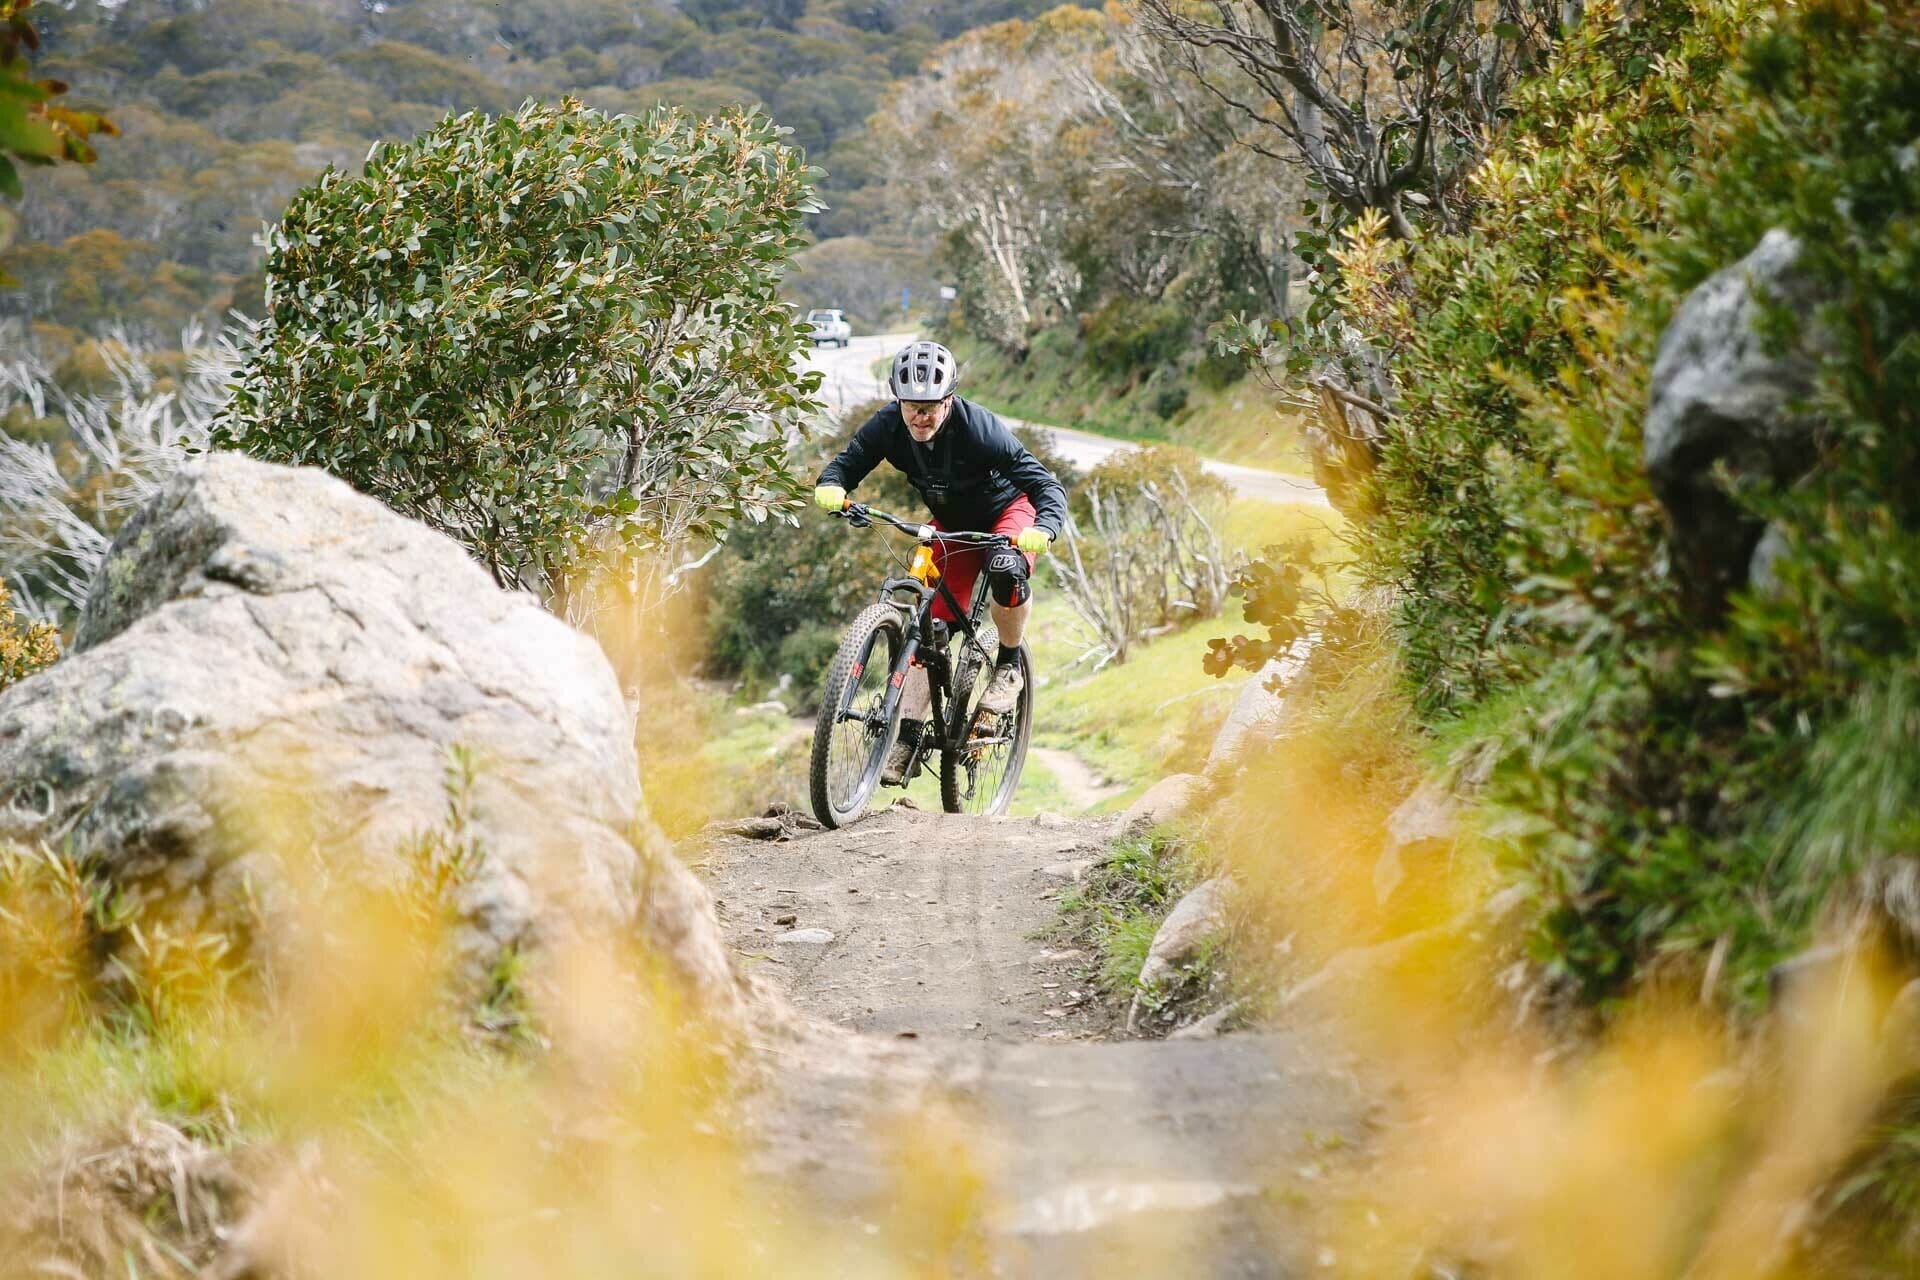 a rider climbs the trail, shot by Kale Munro, Tourism North East, Falls Creek, High Country, Victoria, mountain bike, cross country, cardio, hard work